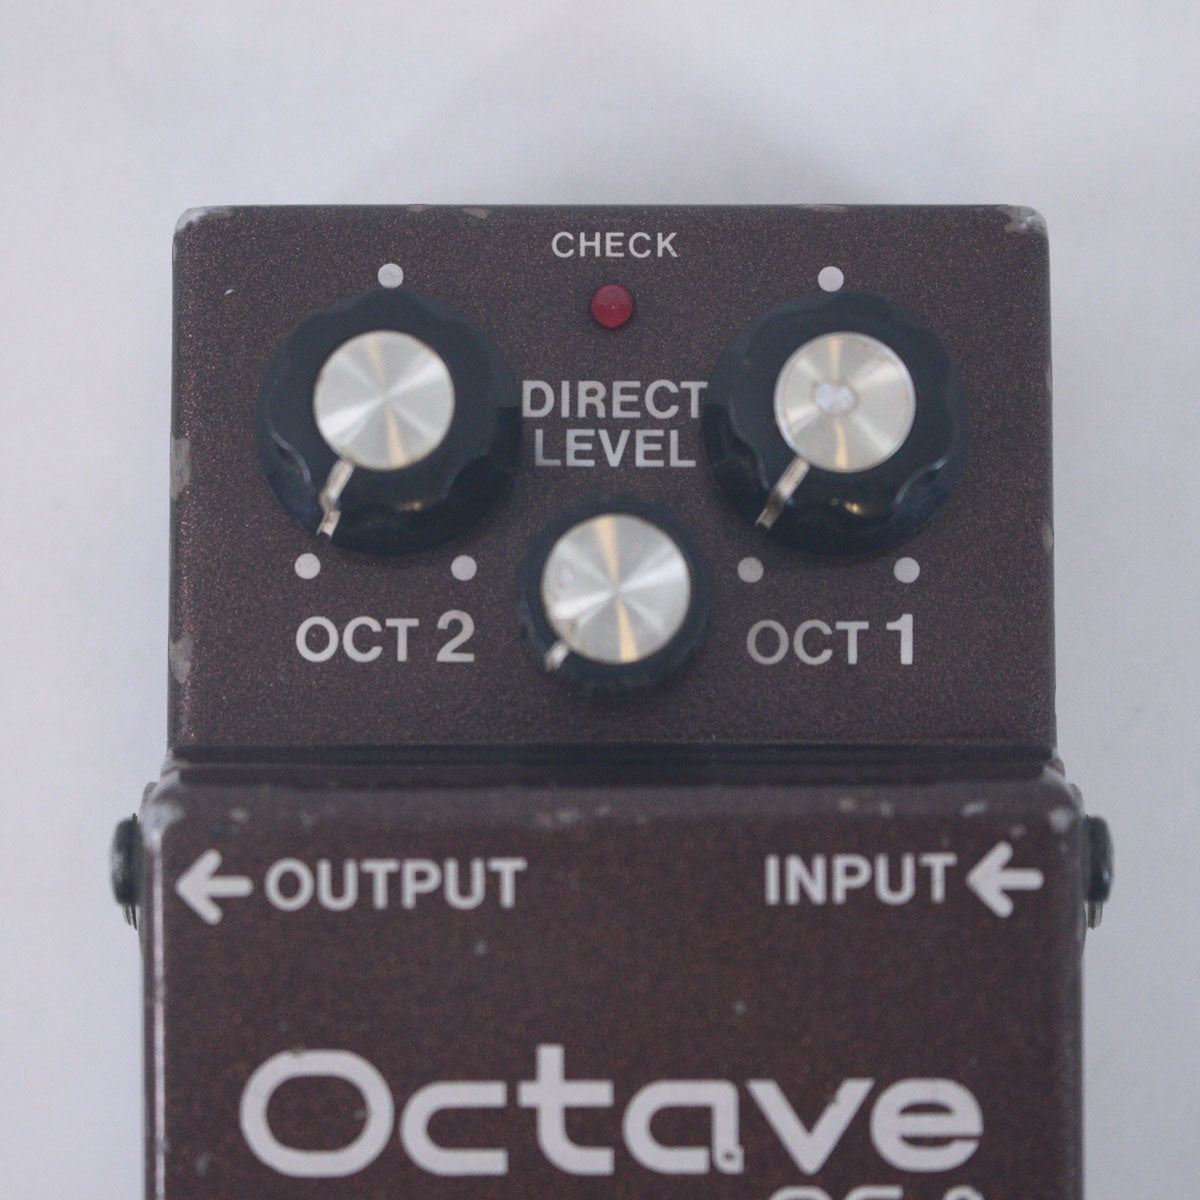 [SN IN 14454] USED BOSS / OC-2 Octave TAIWAN/PSA [05]